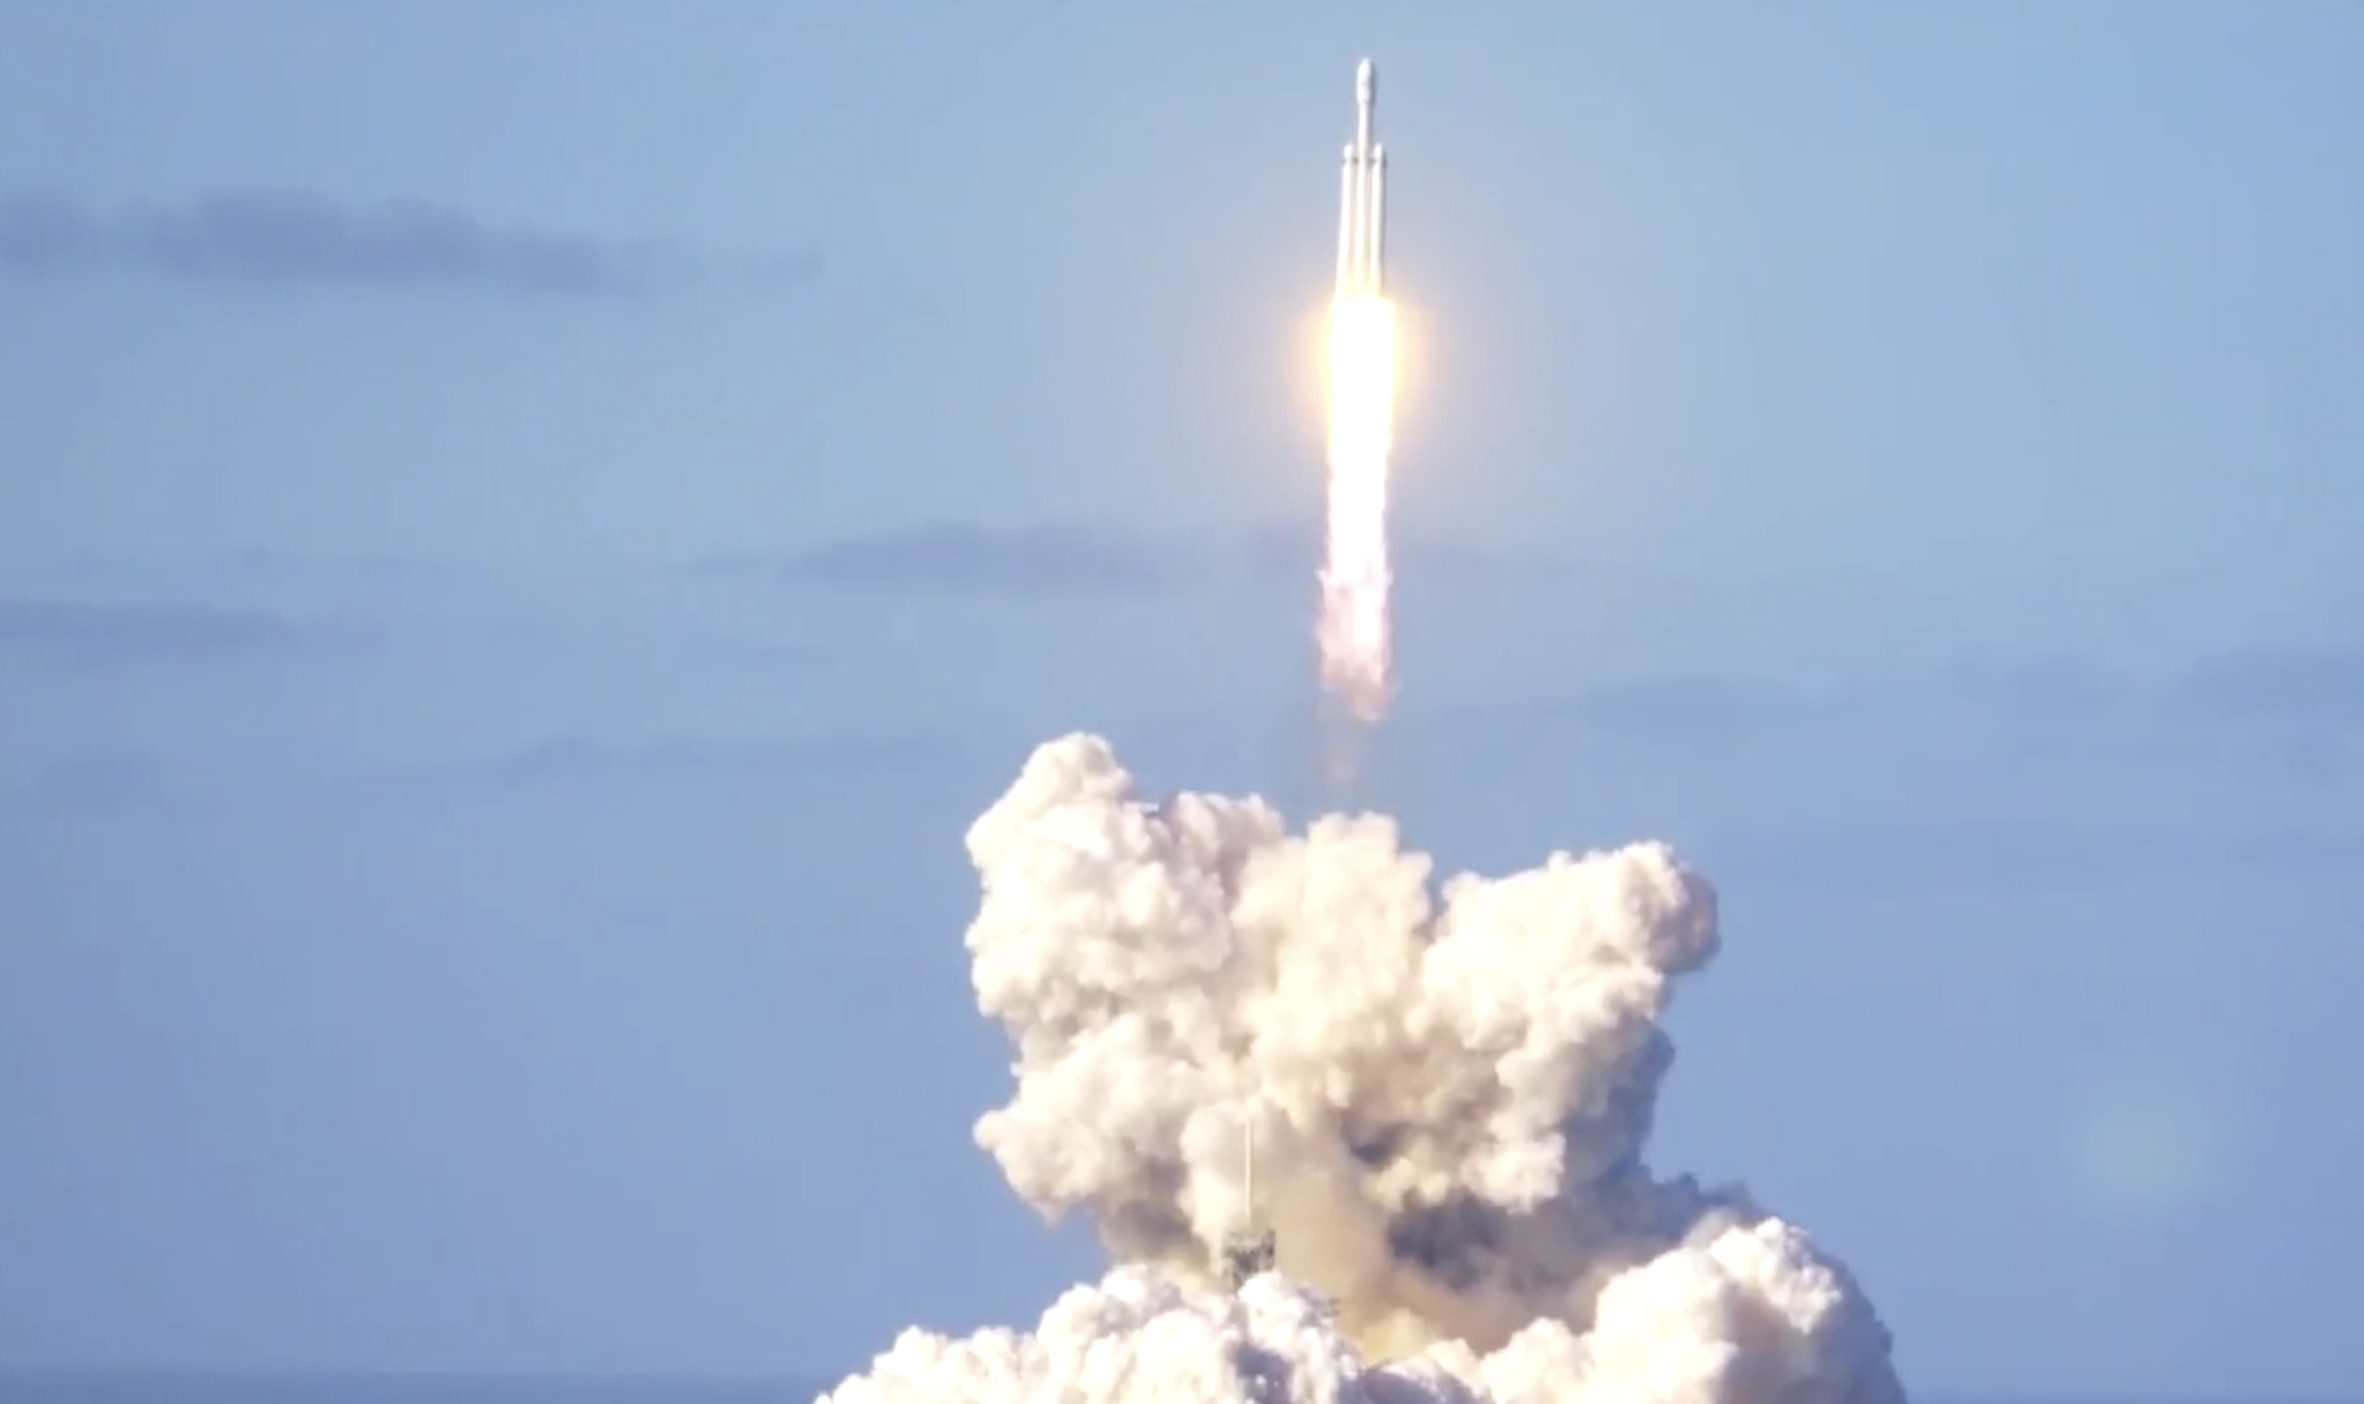 The Falcon Heavy lifts off, on its way to orbit and then Mars. Credit: SpaceX